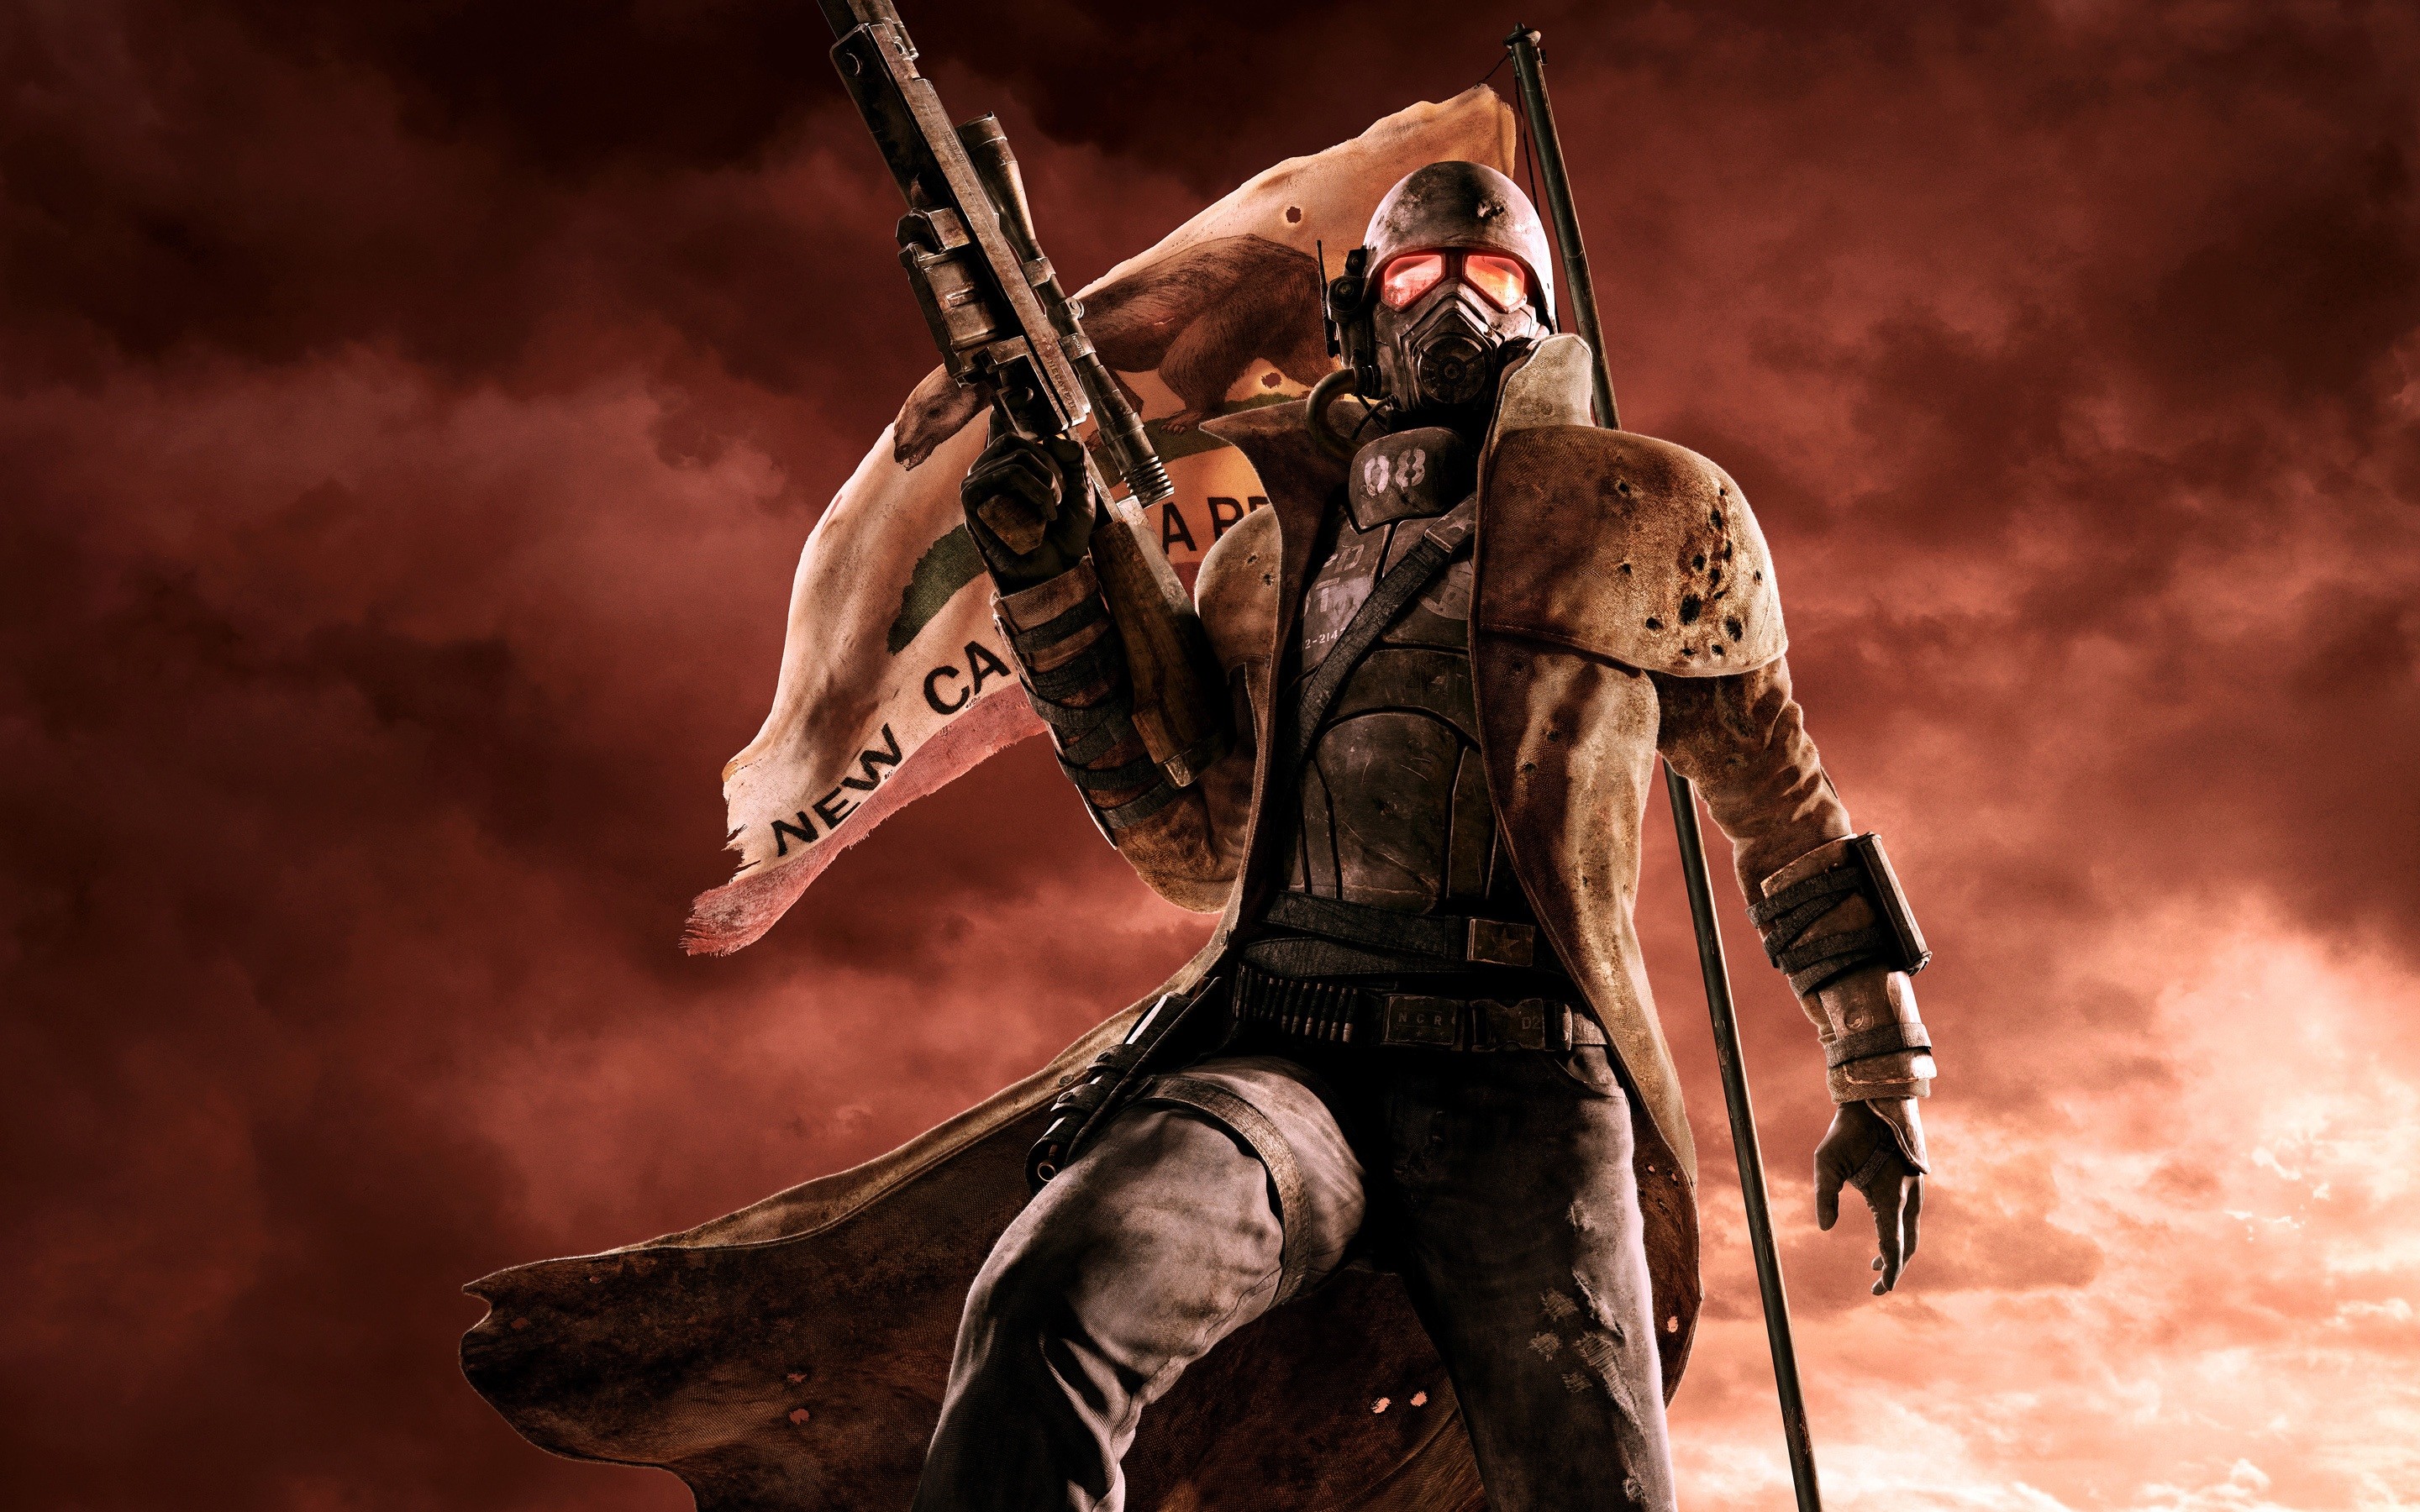 Fallout Ncr Ranger Wallpaper 70 Pictures Images, Photos, Reviews